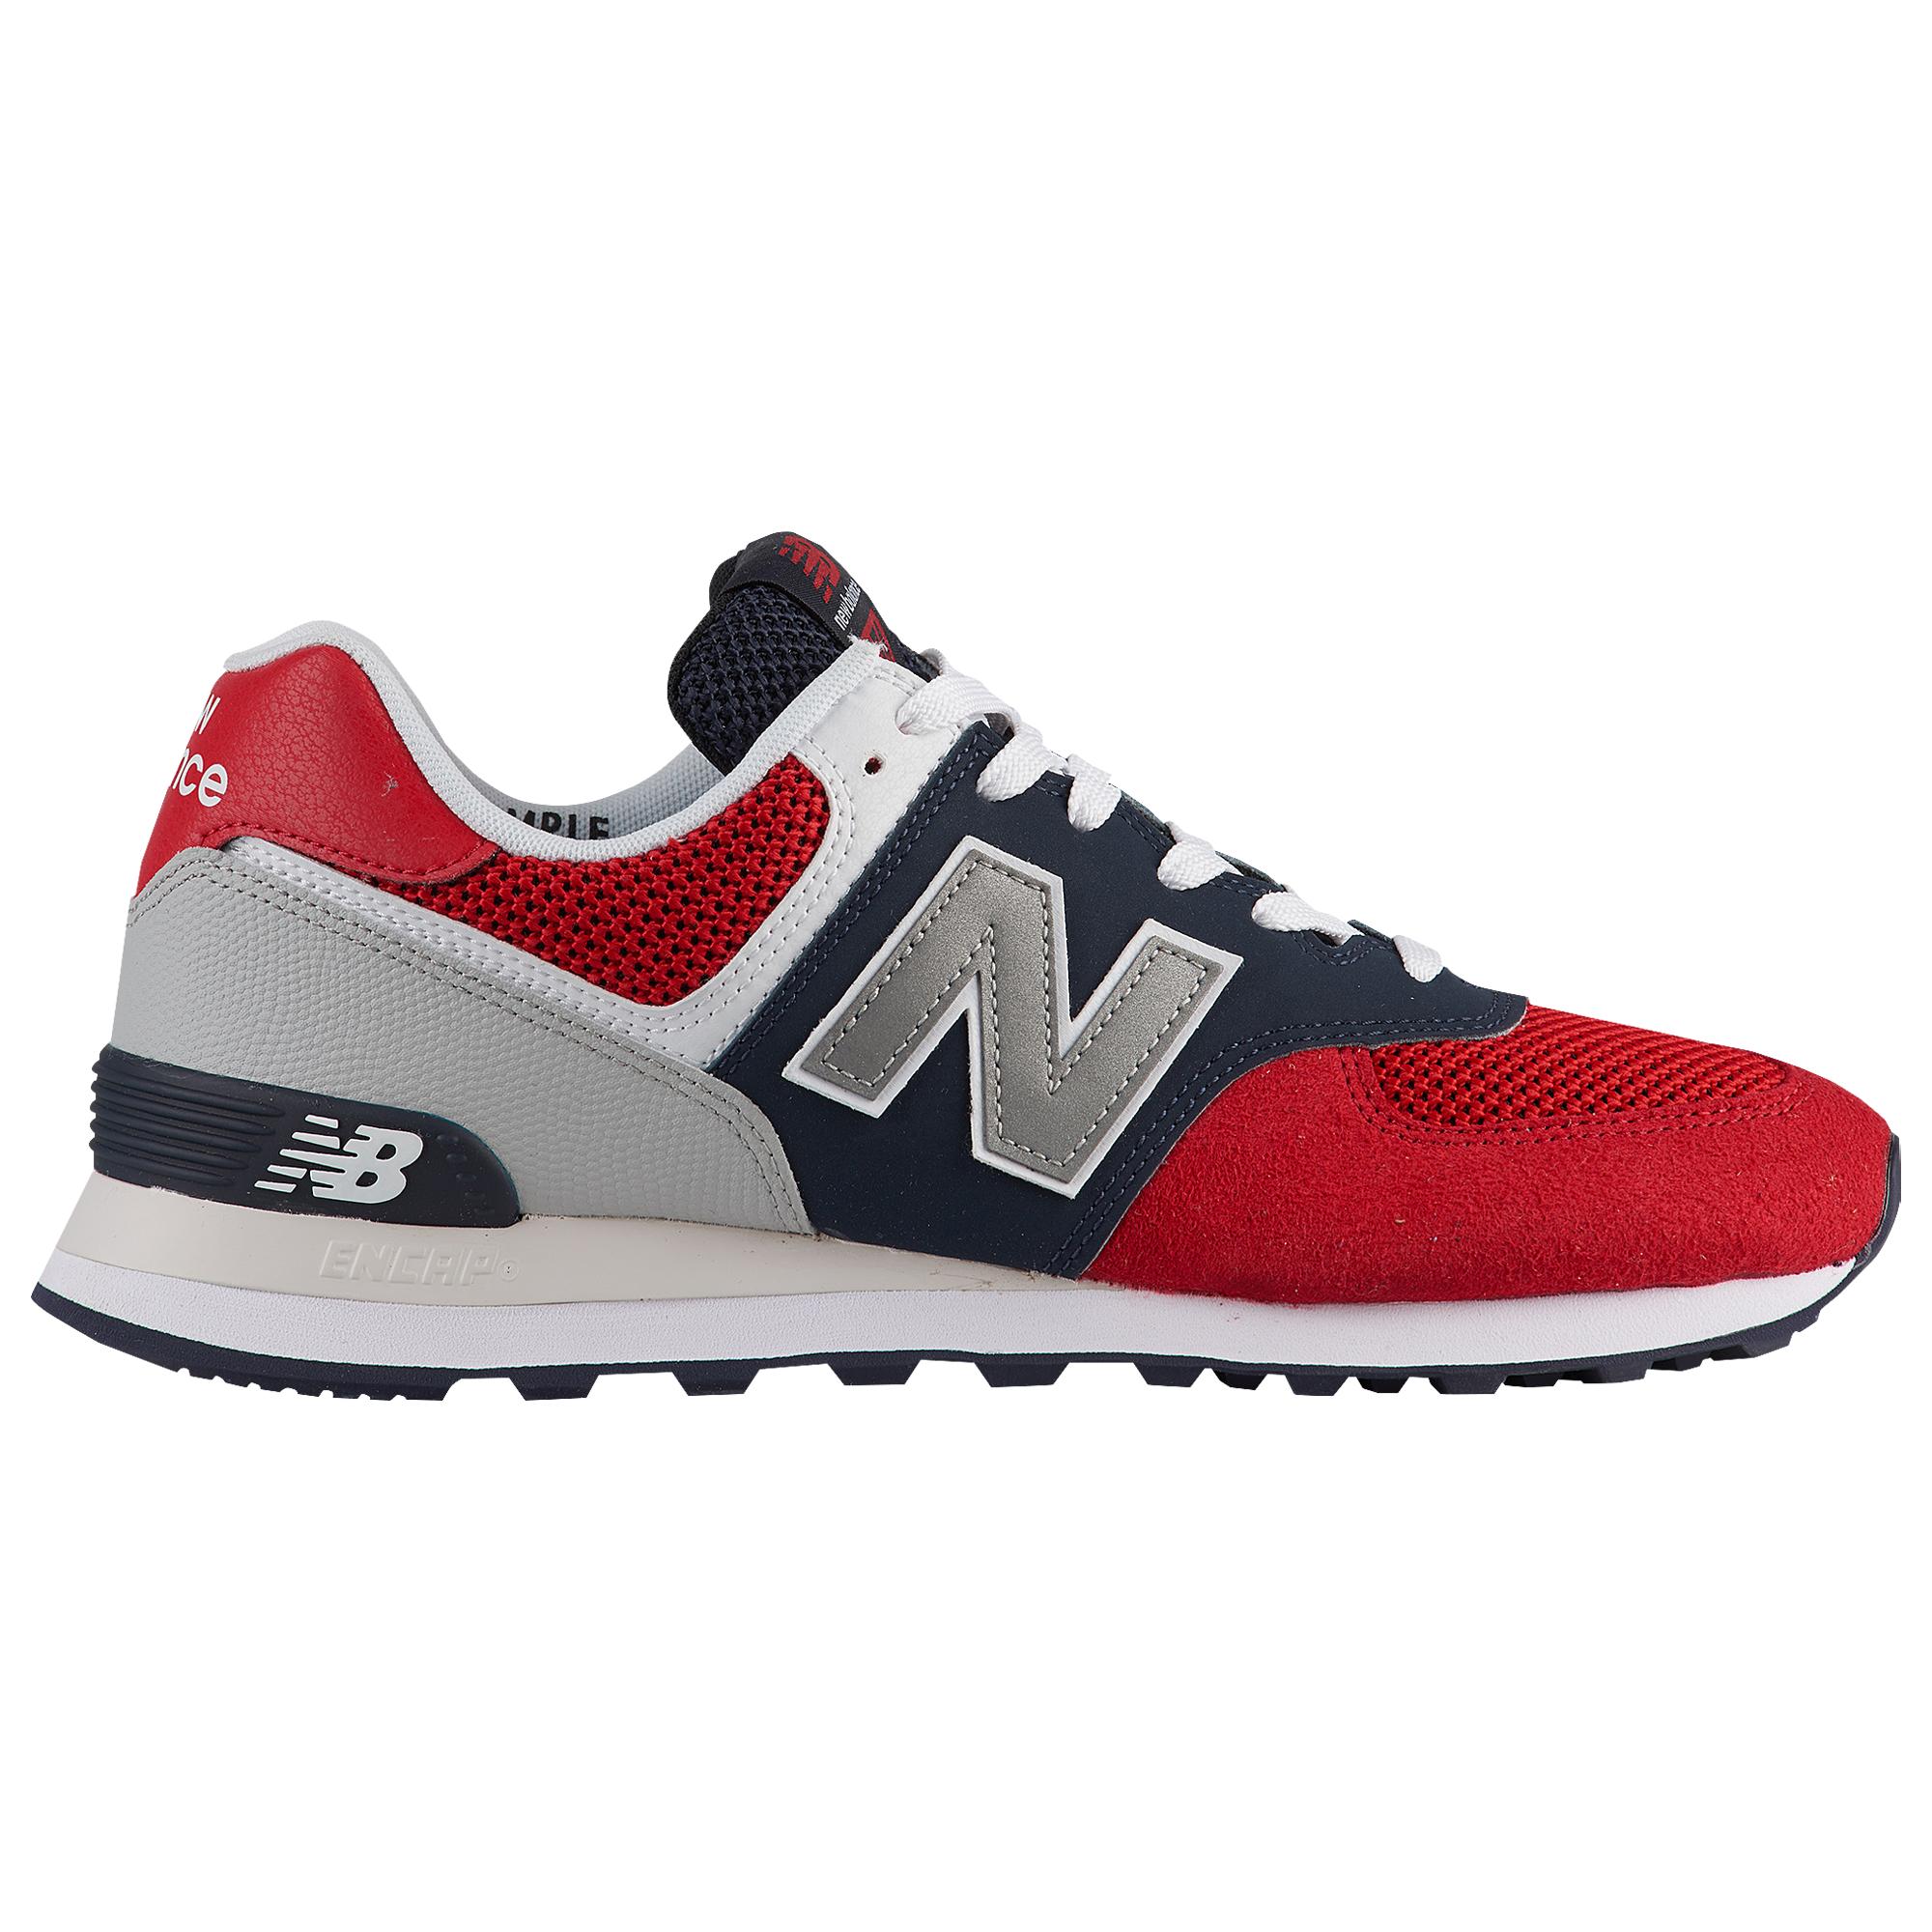 New Balance Rubber 574 Running Shoes in Red for Men - Save 56% - Lyst